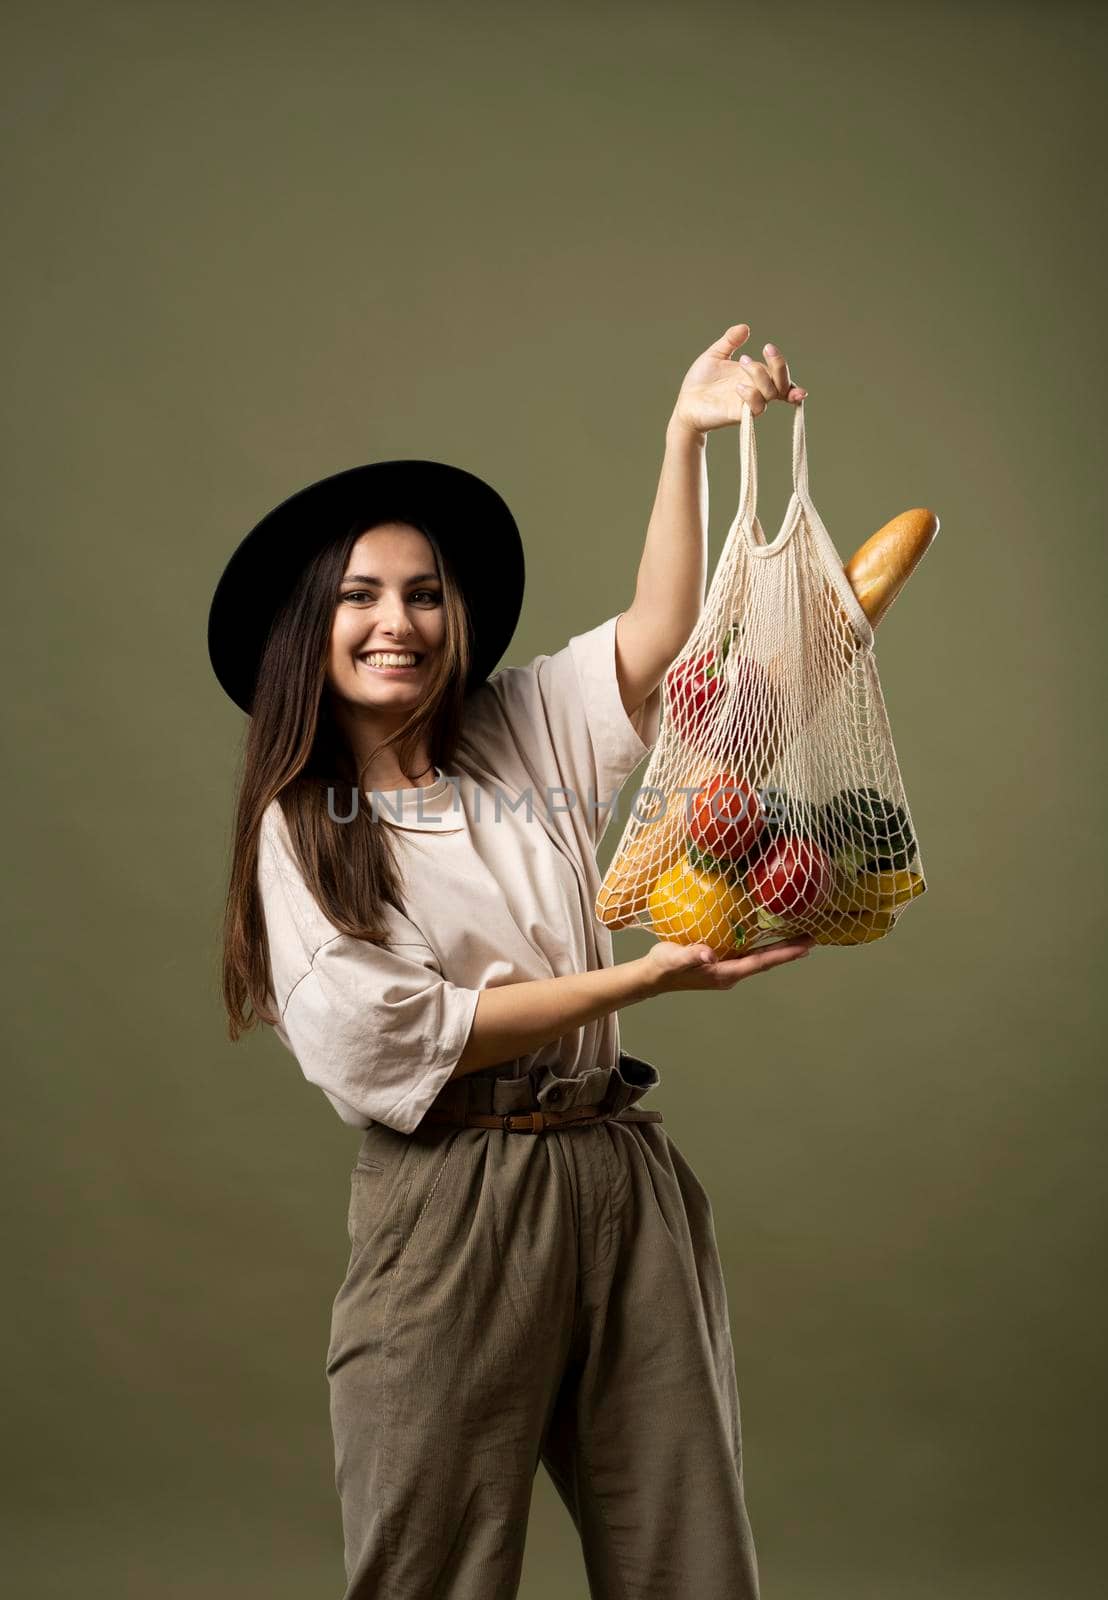 Cheerful brunette woman in beige t-shirt and black hat holding a mesh eco bag full of fruits and vegetables on natural green background in studio. Zero waste concept